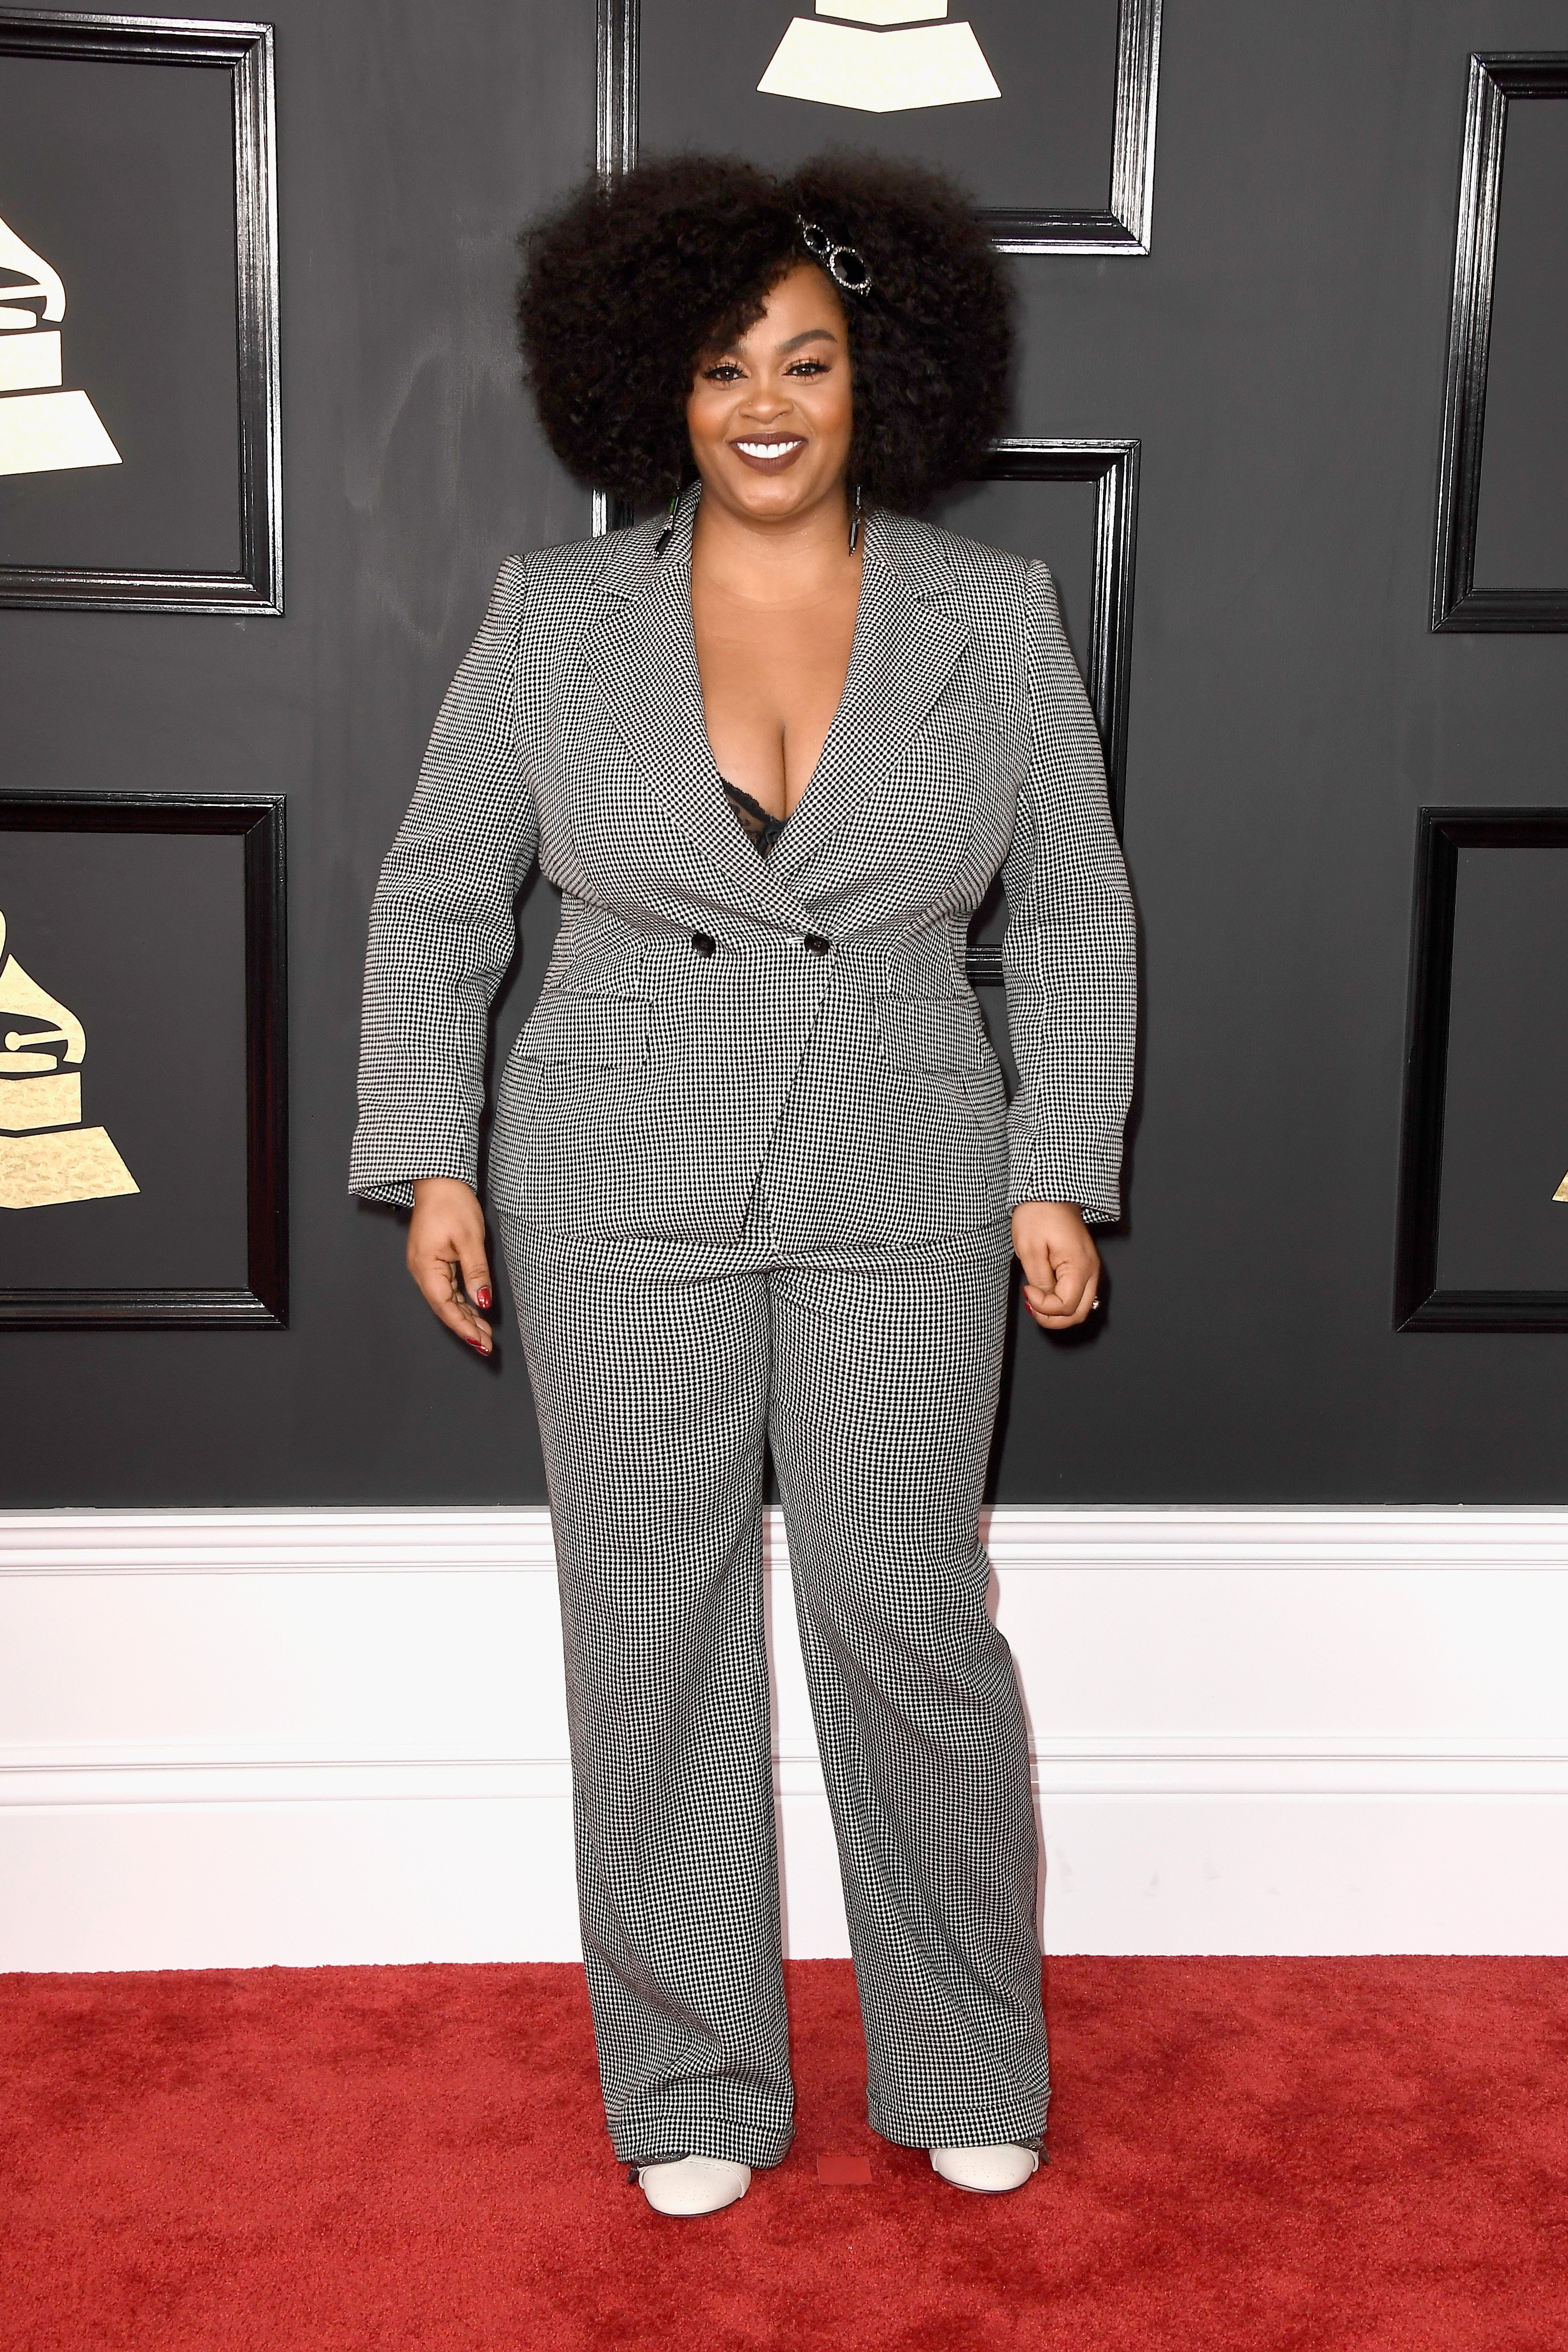 Jill Scott attends The 59th Grammy Awards at STAPLES Center on February 12, 2017 in Los Angeles, California | Photo: Getty Images